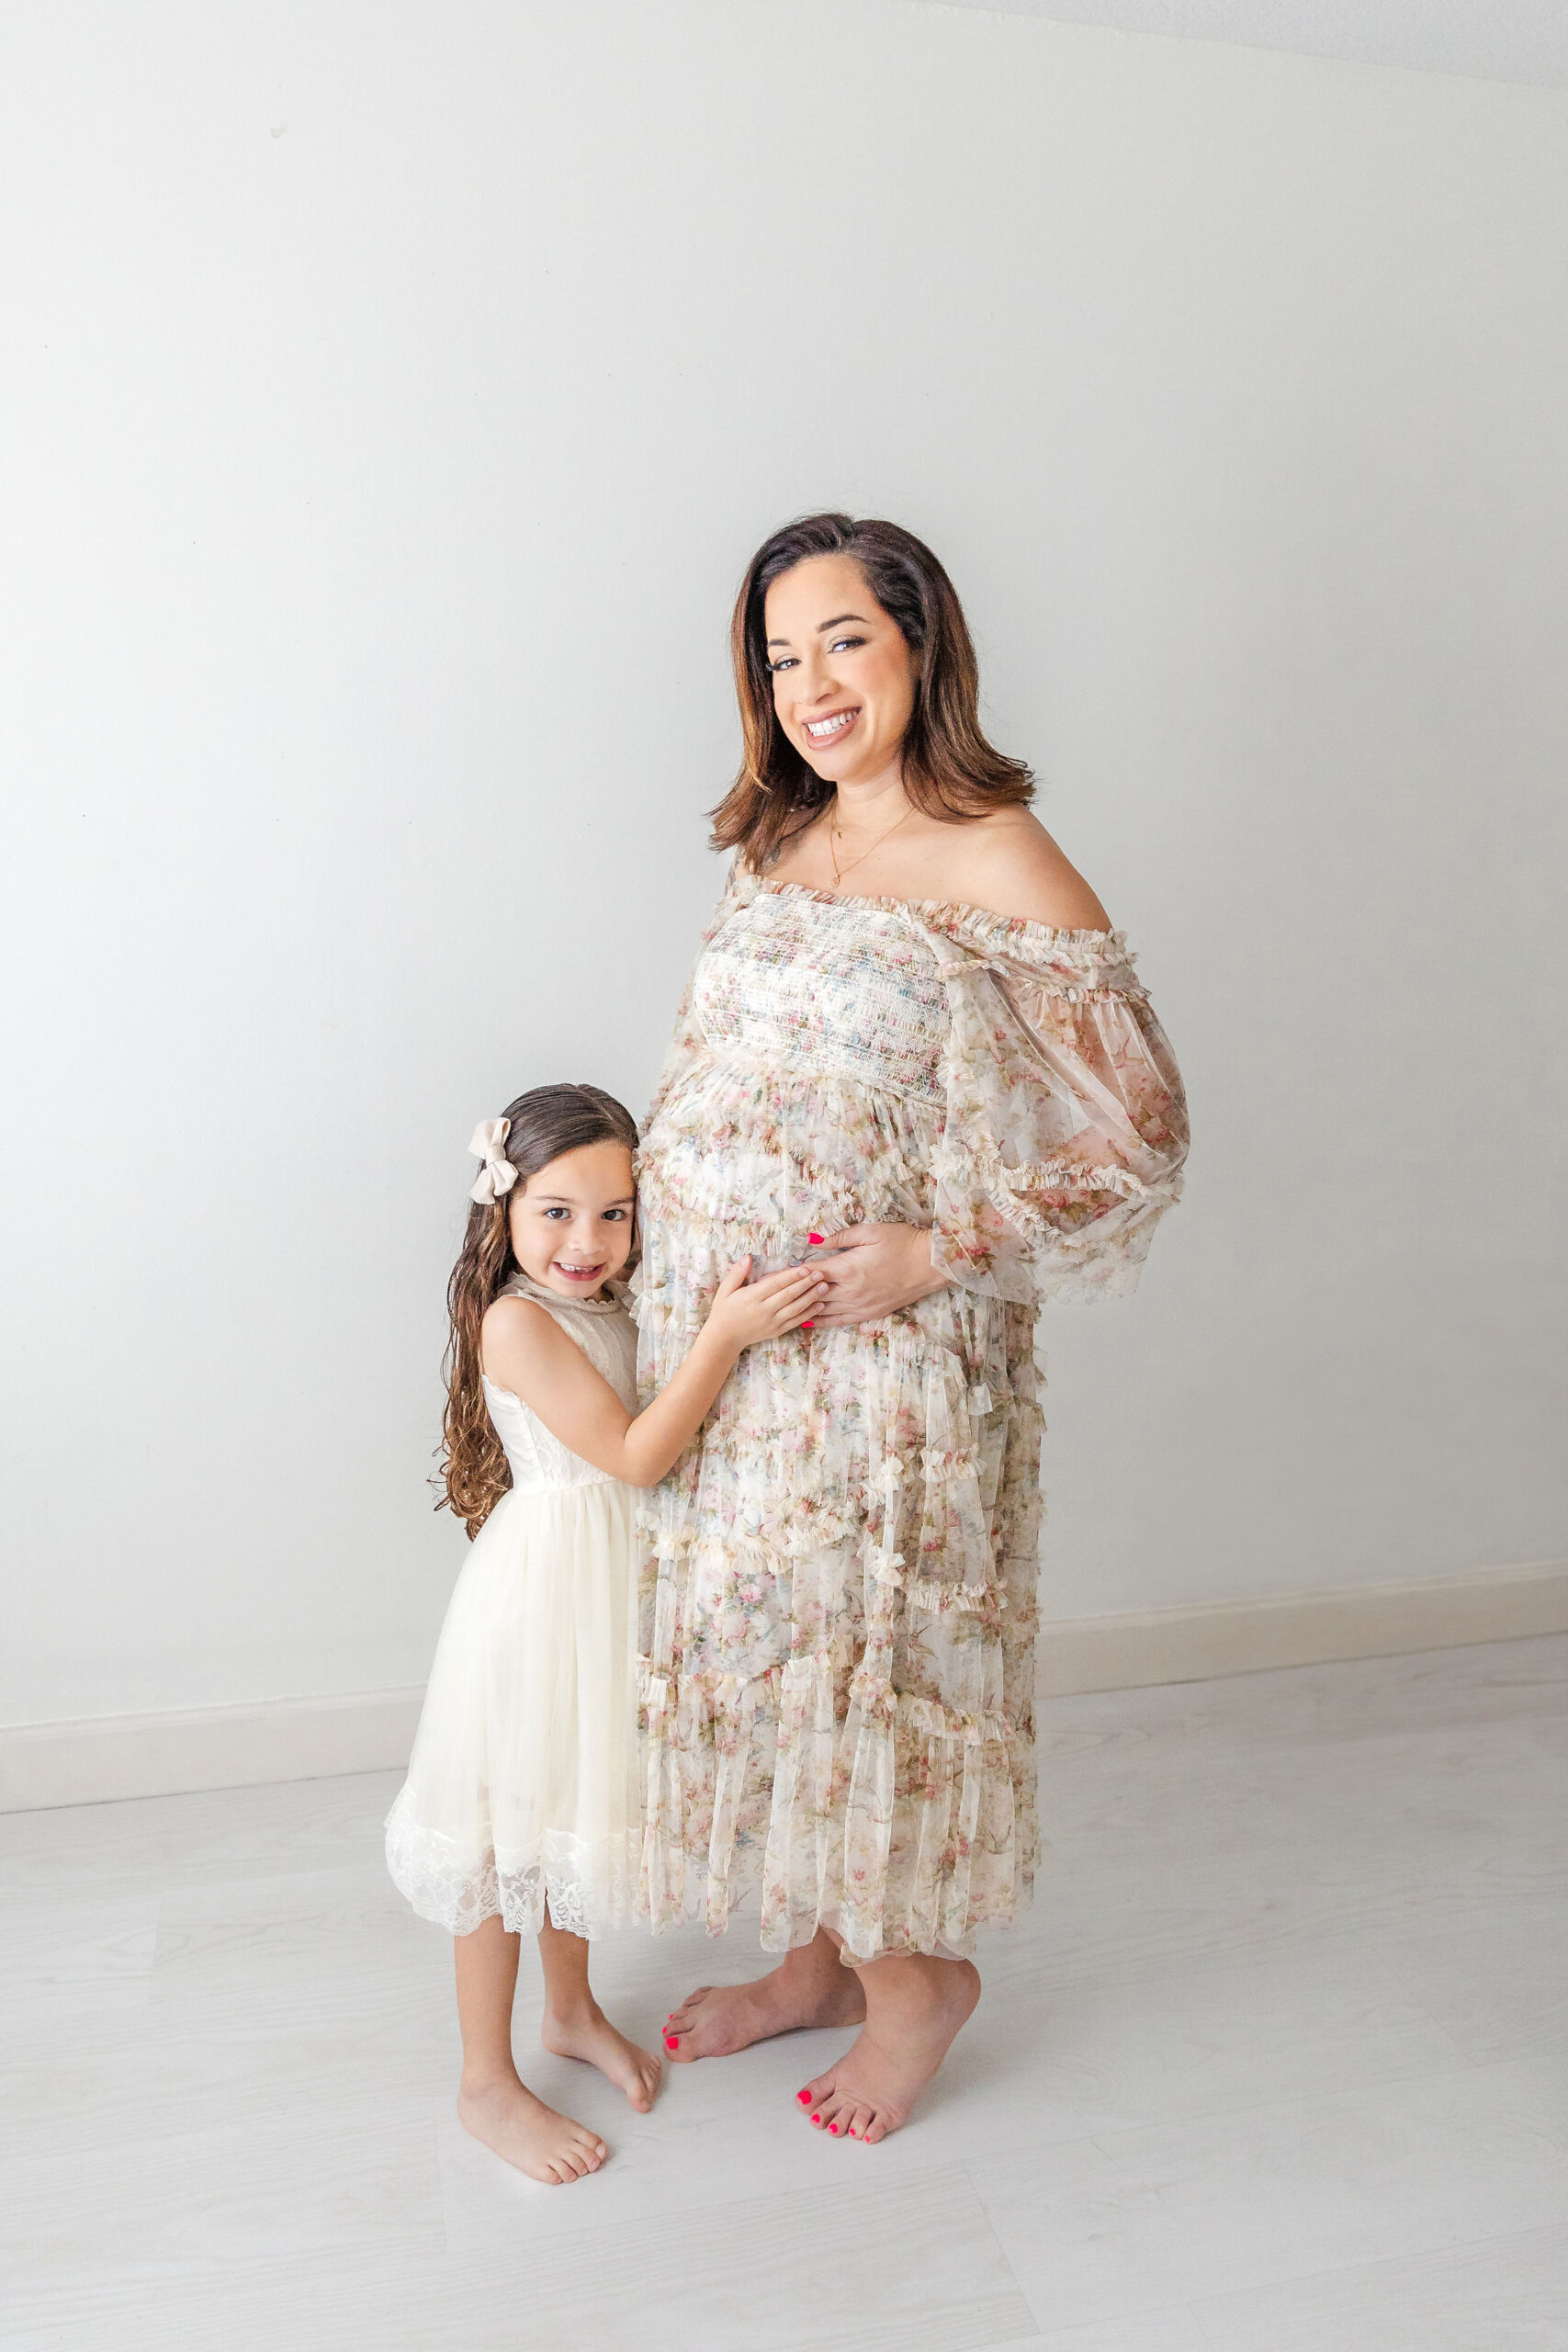 A pregnant mother stands in a studio with her toddler daughter in a white dress as they hug the bump